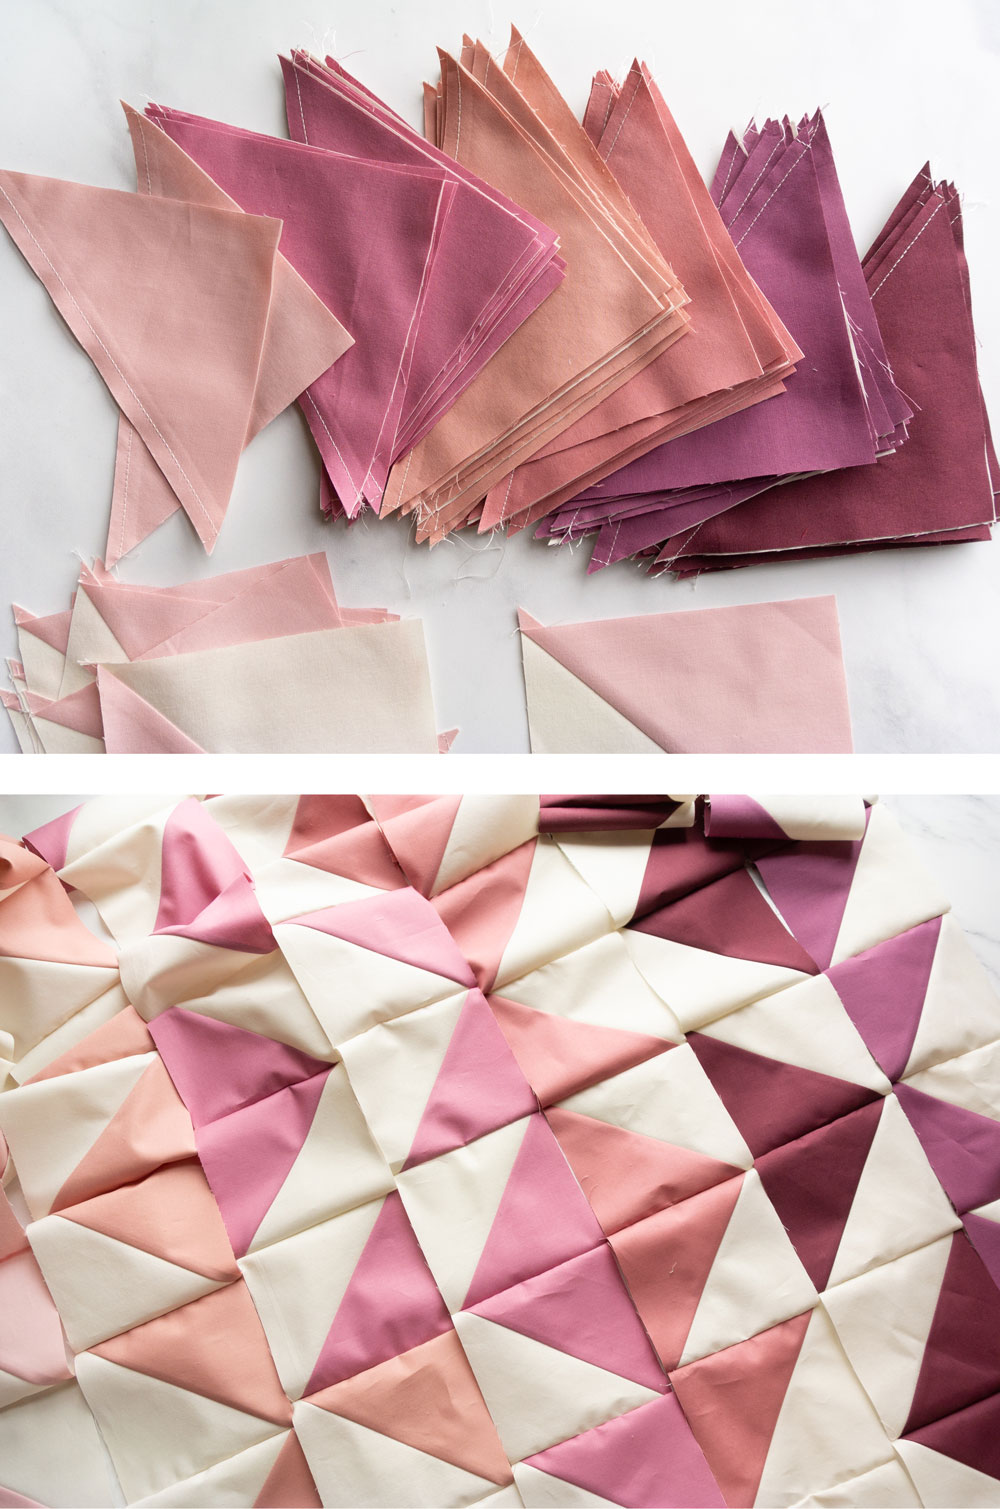 Change your favorite quilt pattern into an ombré quilt by converting yardage into fat quarters. Included is a half square triangle conversion chart and tutorial! | Suzy Quilts #halfsquaretriangle  #modernquilts #ombrequilt